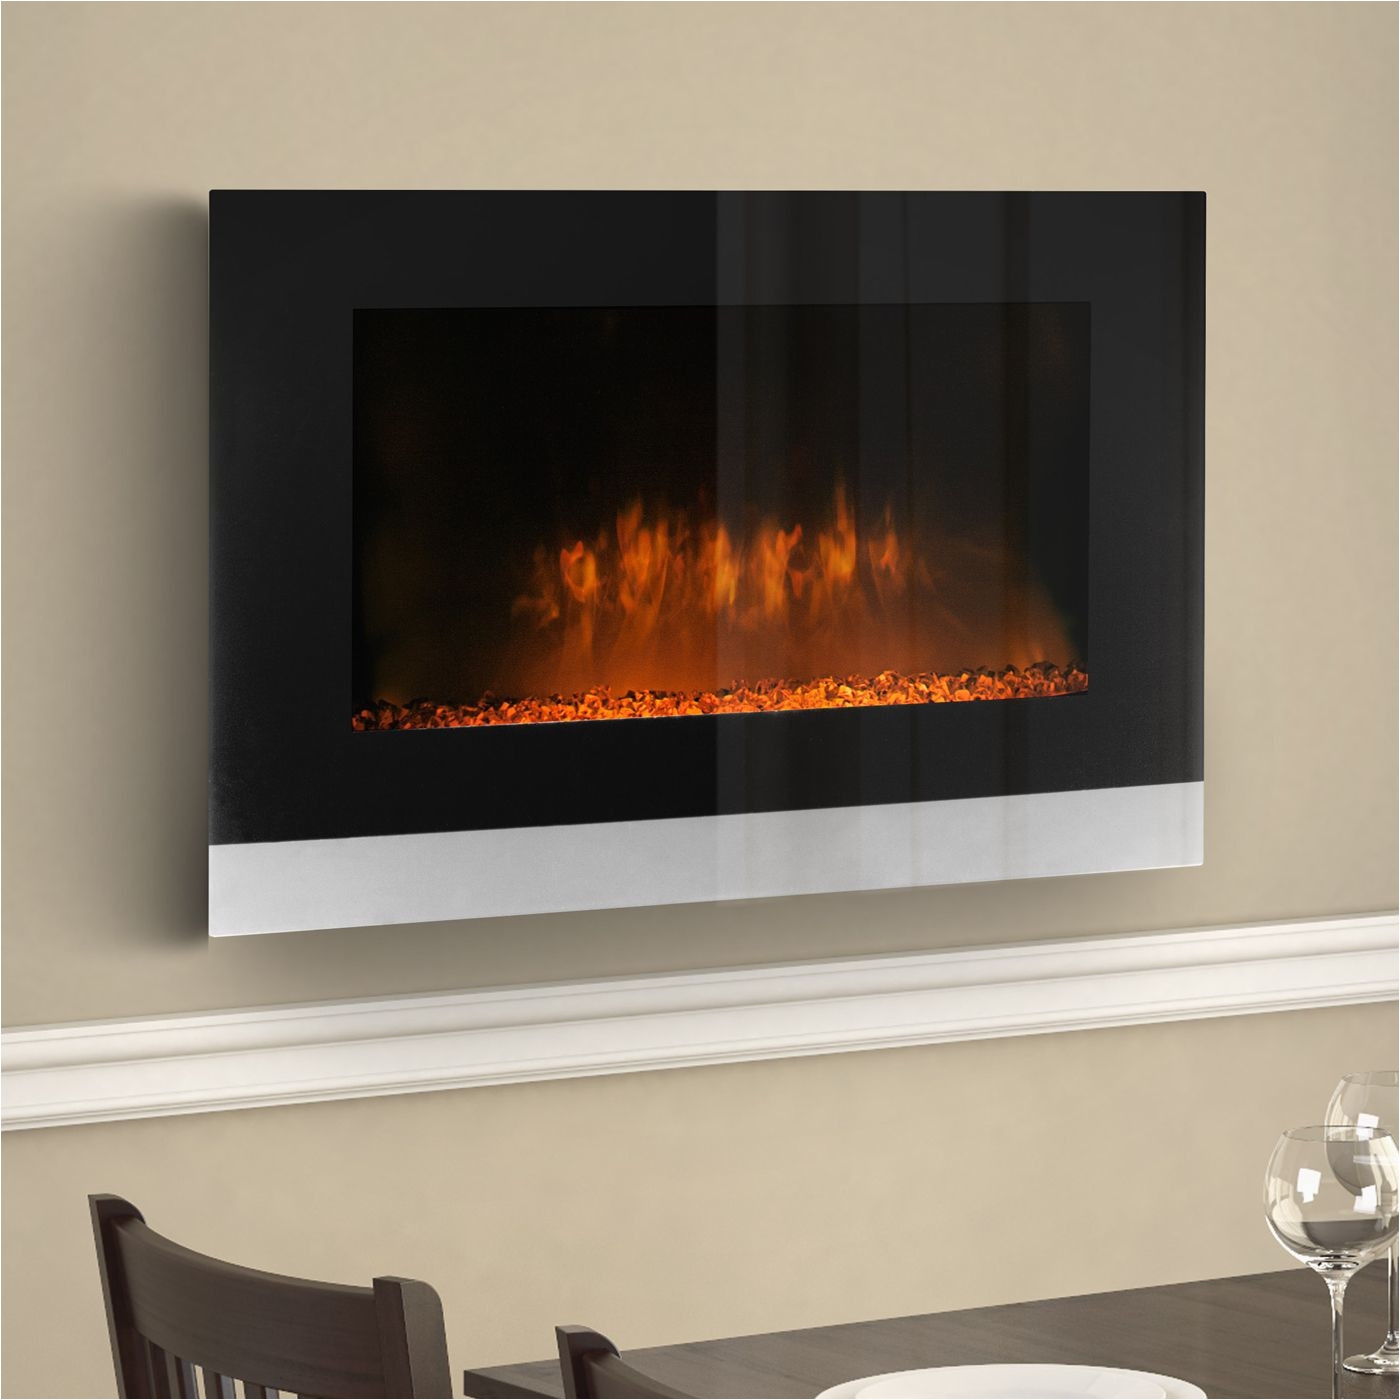 Lowes Fireplace Heater Inspirational Menards Electric Fireplaces Sale